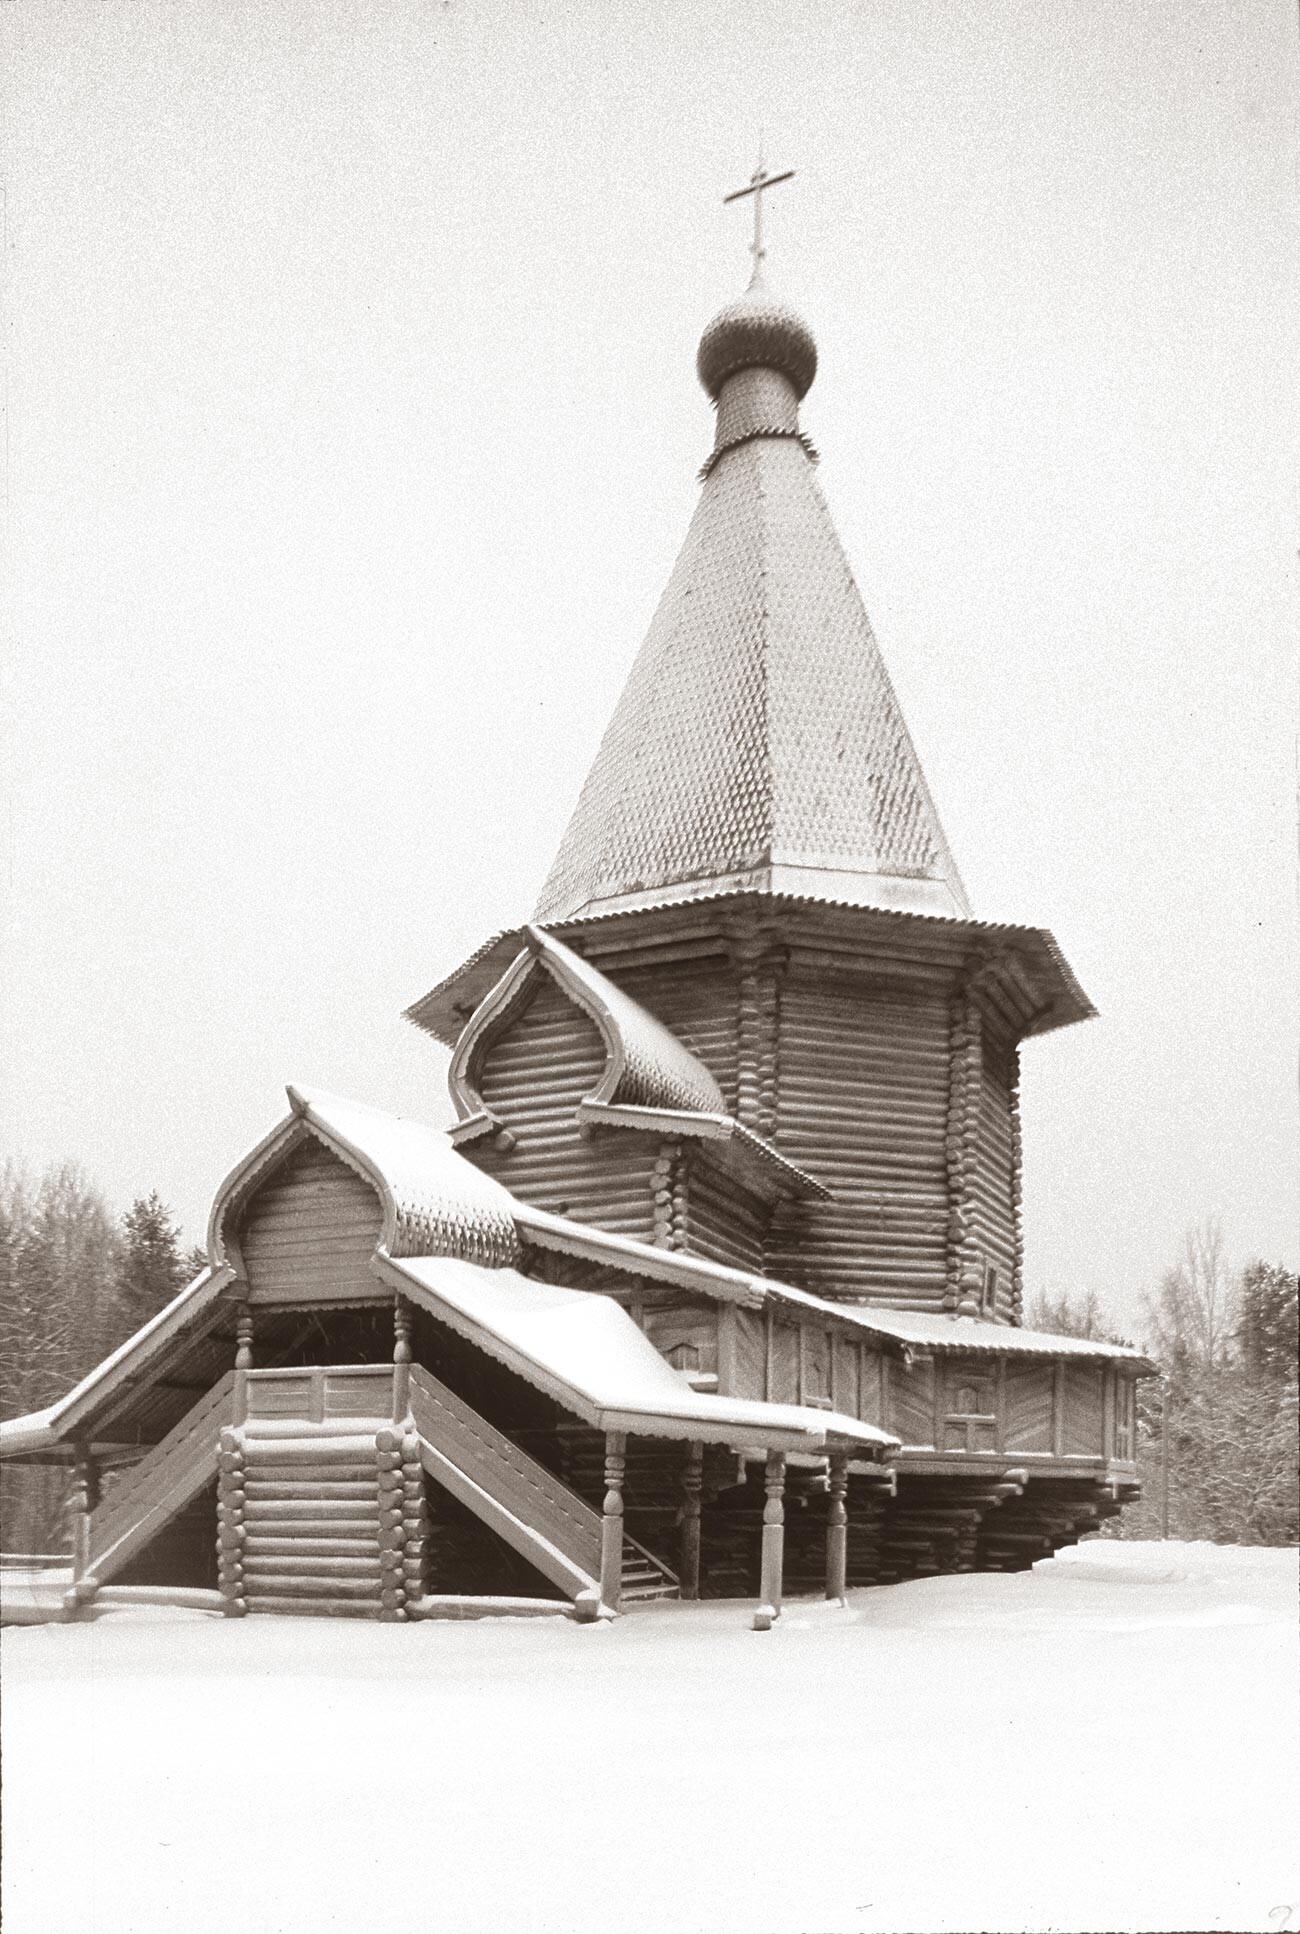 Malye Korely (open air museum near Arkhangelsk). Log Church of St. George from village of Vershina. Southwest view. December 30, 1998